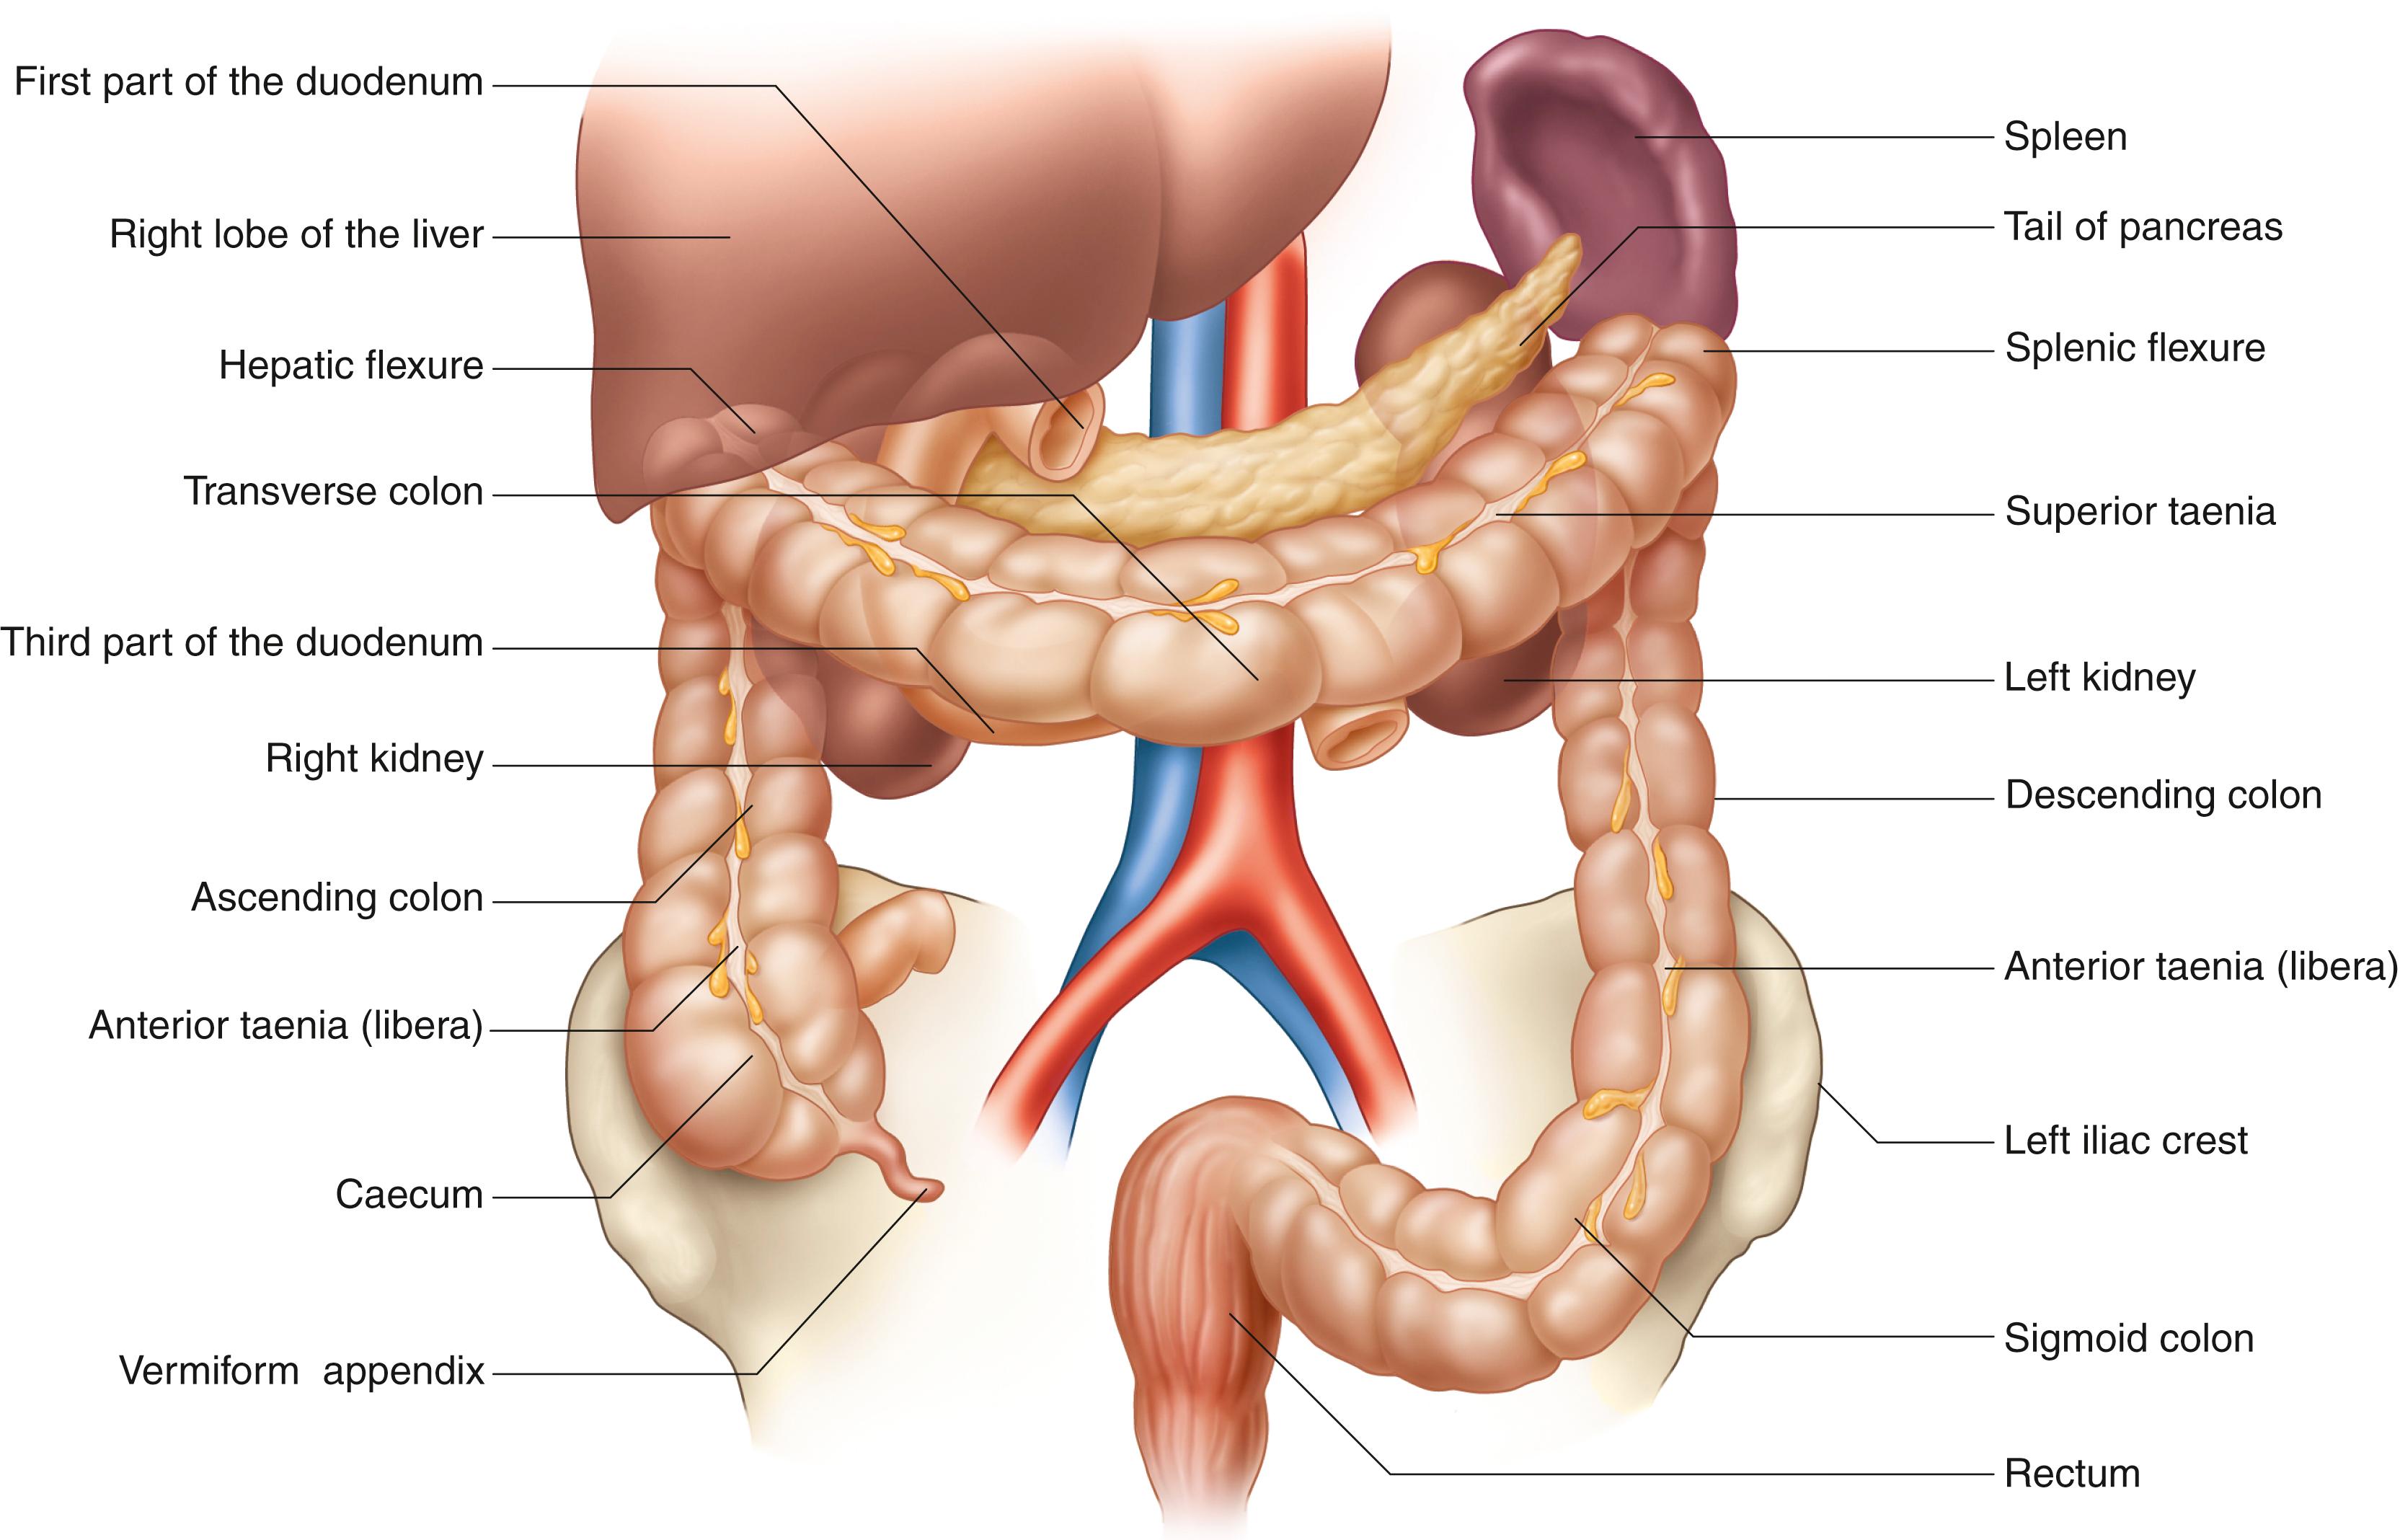 Fig. 52.4, The large bowel includes the colon, consisting of ascending, transverse, descending, and sigmoid colon and the rectum, shown here in relation to neighboring anatomic structures.